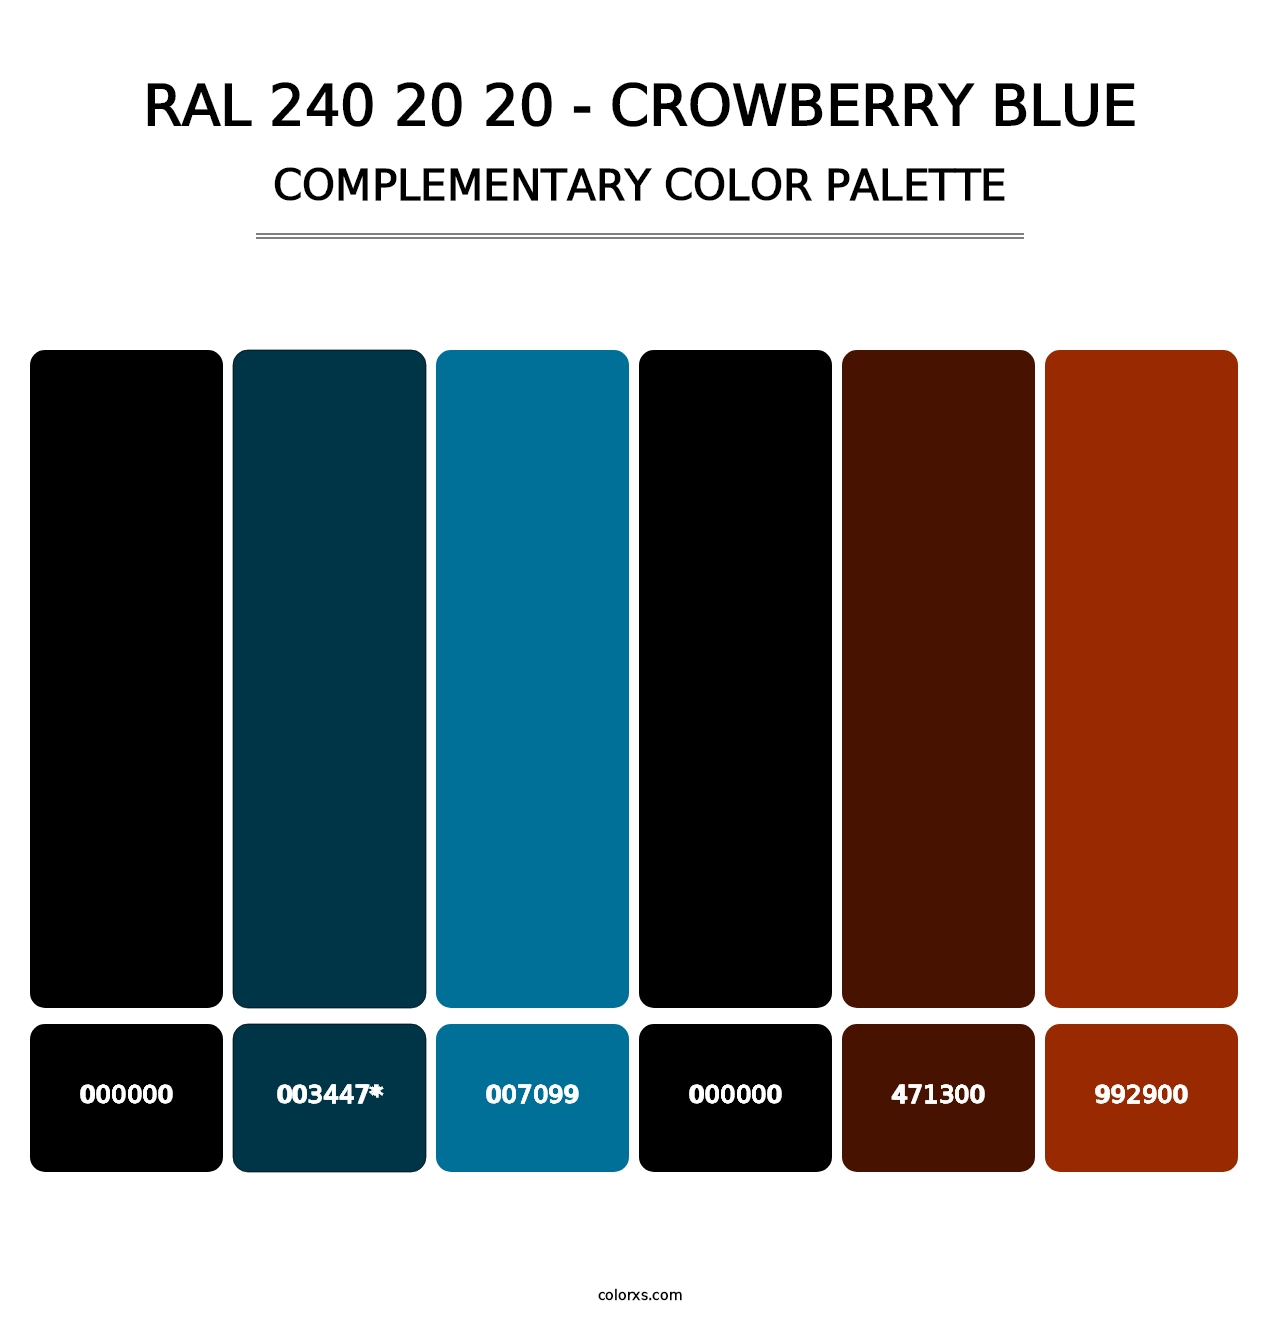 RAL 240 20 20 - Crowberry Blue - Complementary Color Palette